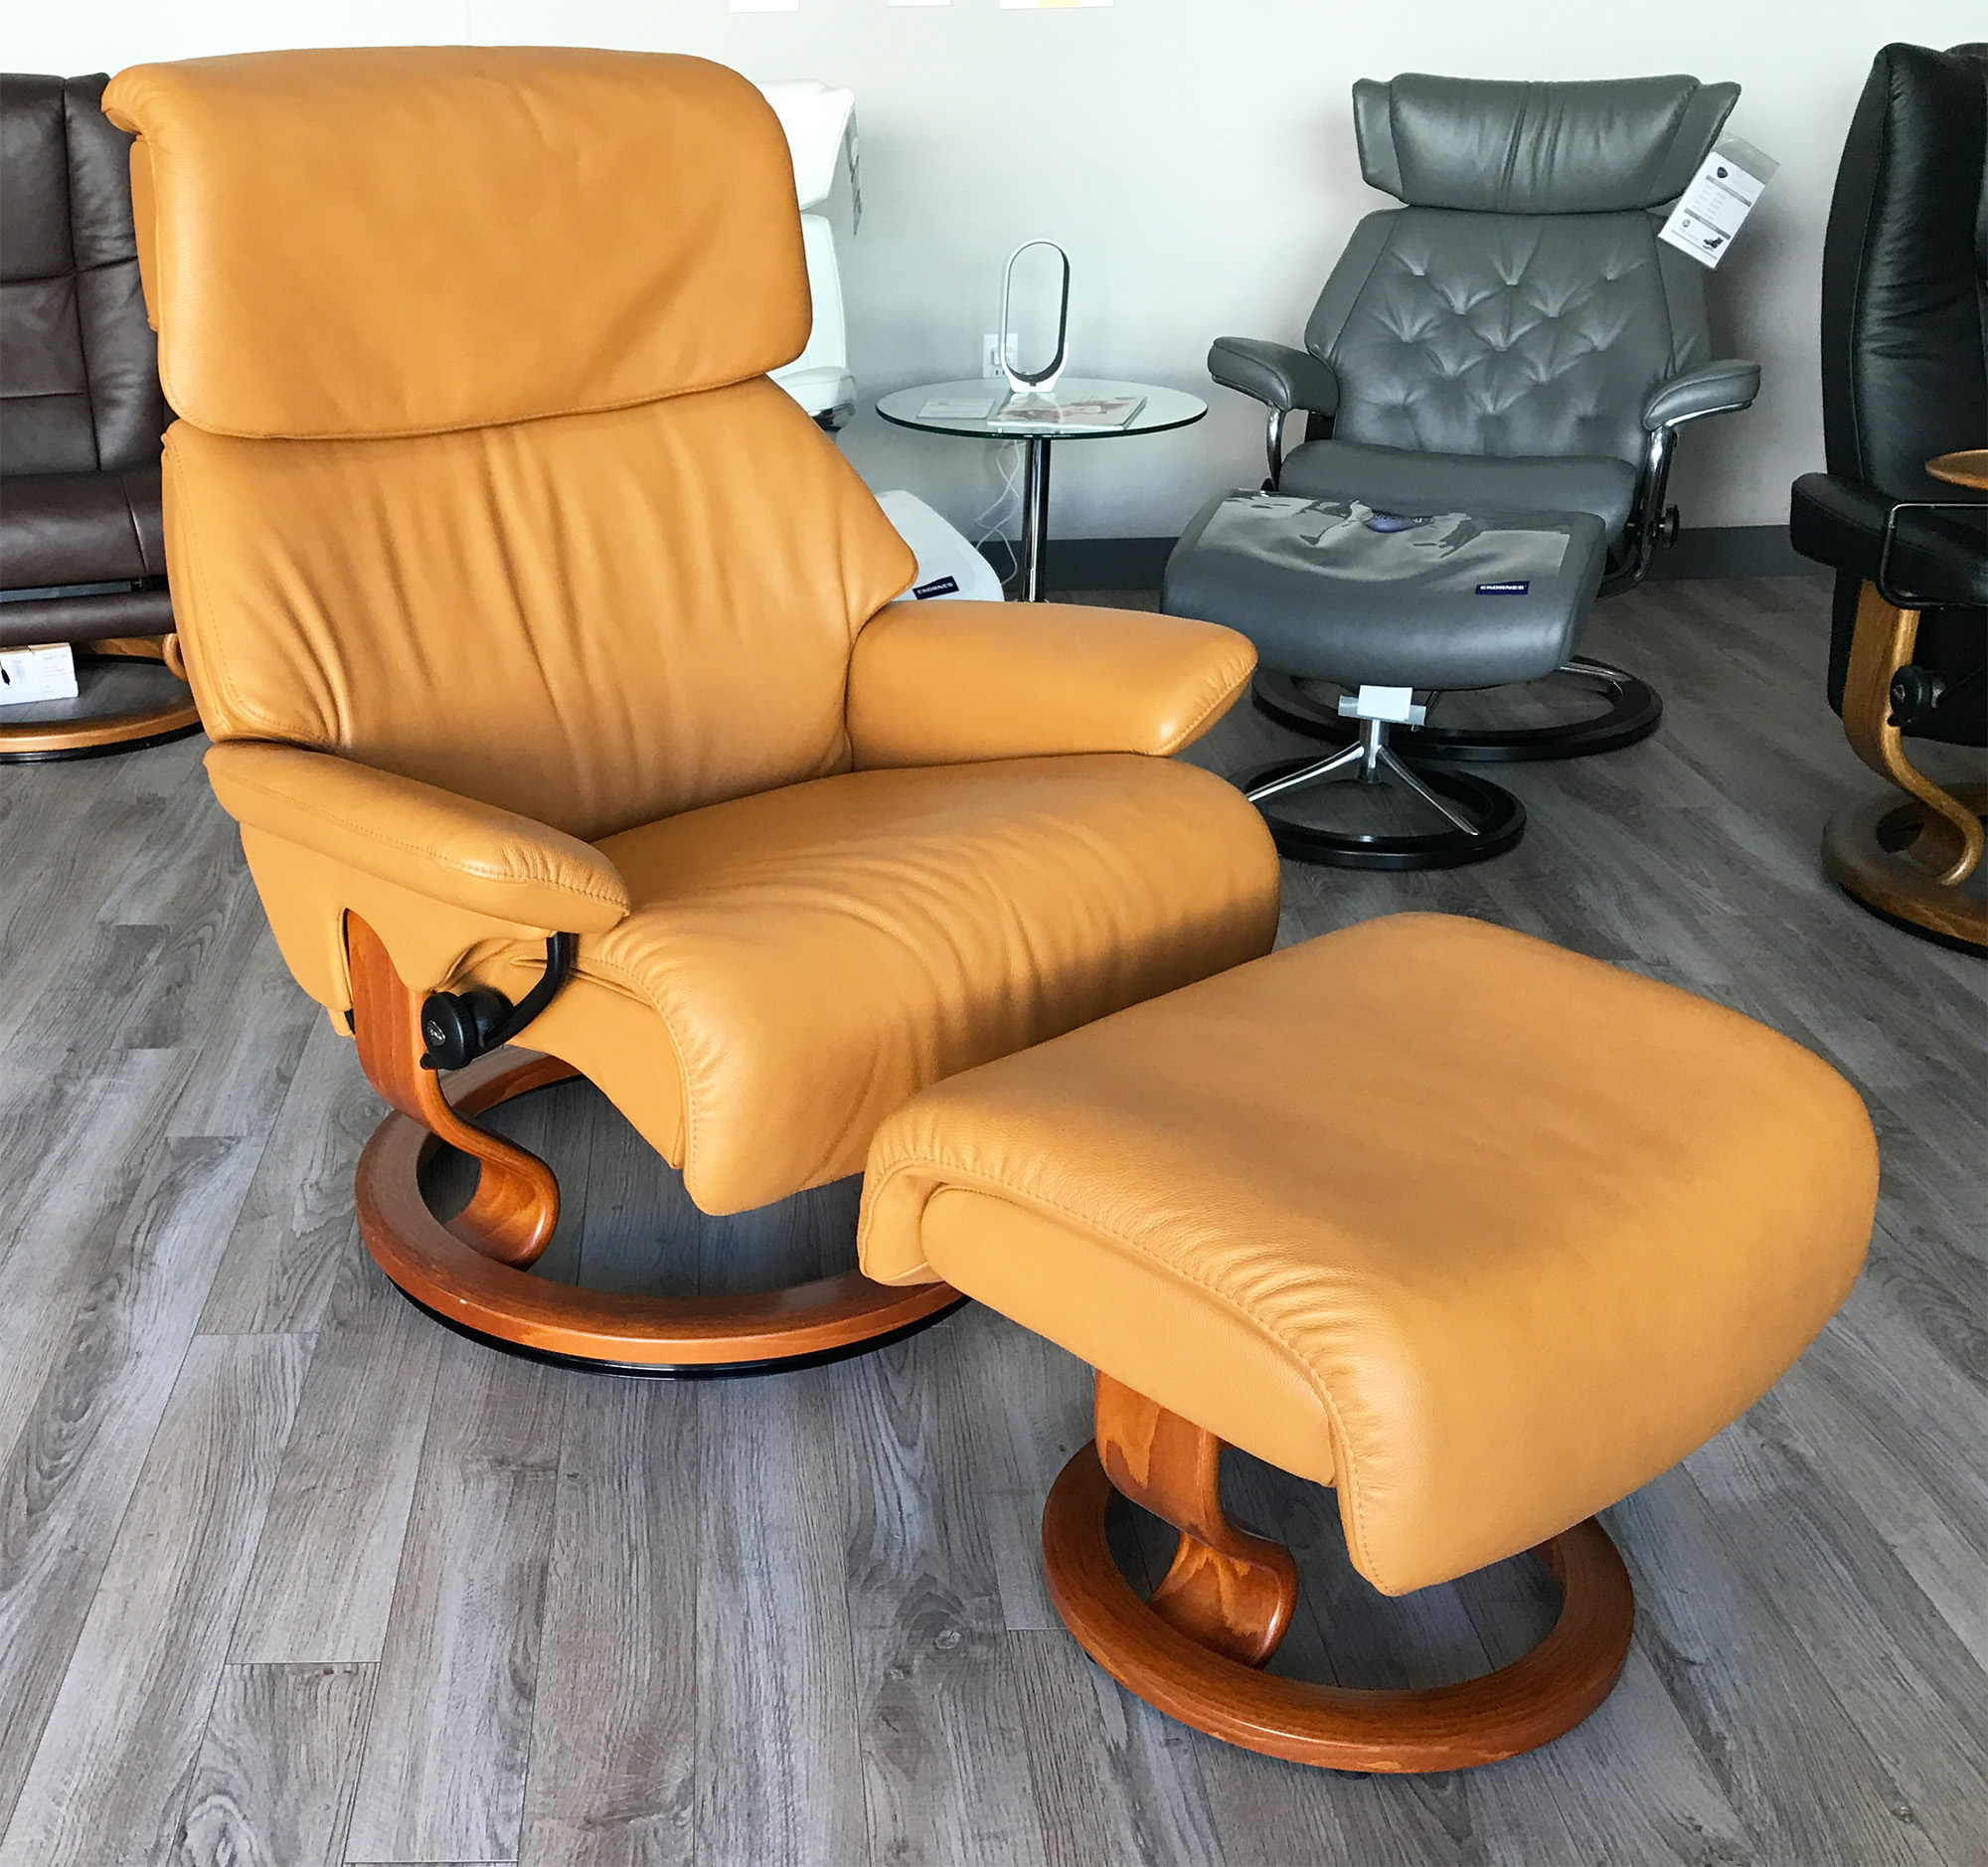 Stressless Spirit Large Leather Recliners Chairs Tan Cori Tan and by Ottoman - Spirit Recliner Leather Large Stressless Chair Dream Cori Dream Ekornes